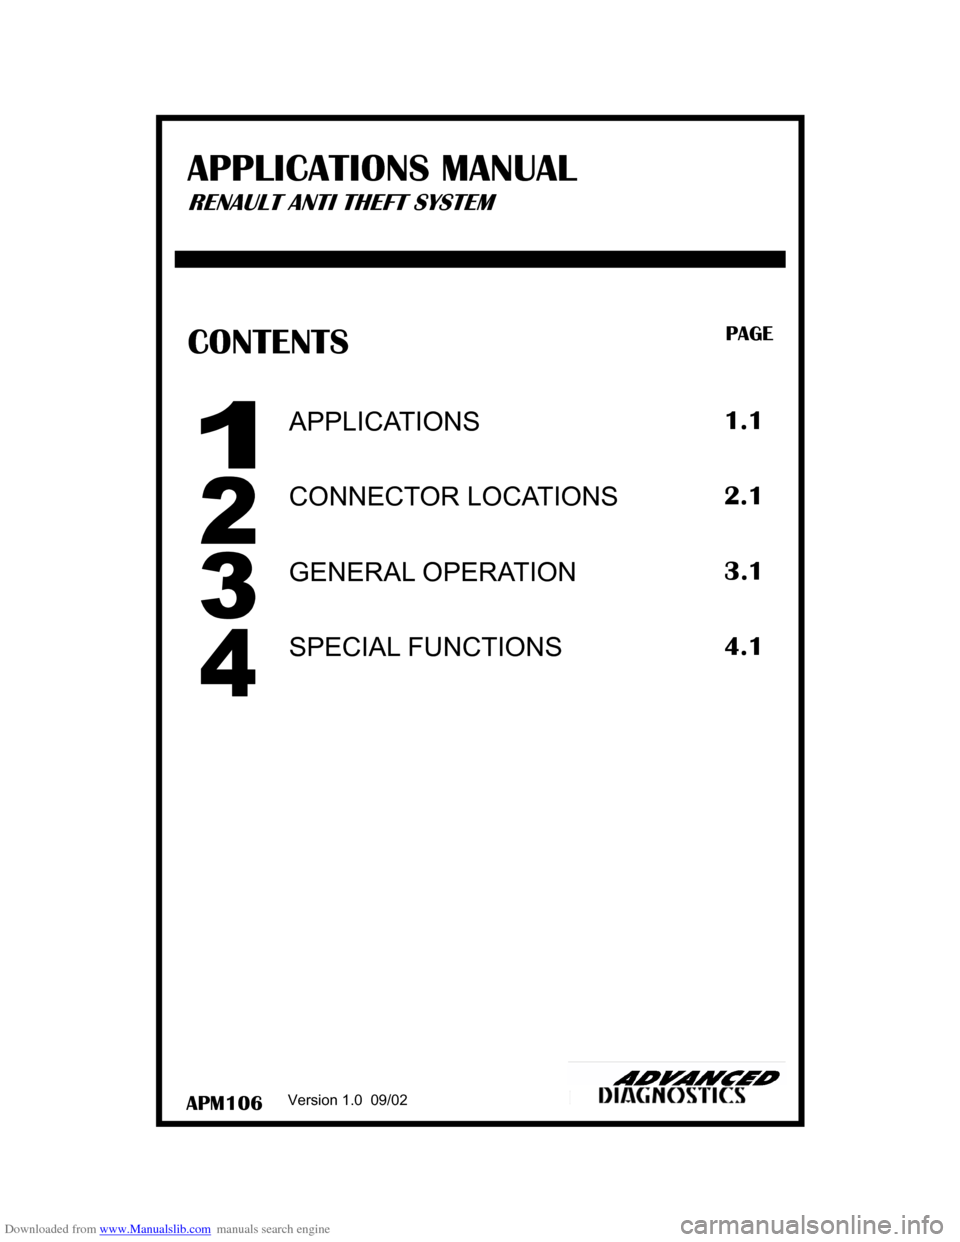 RENAULT TRAFIC 1997 1.G Anti Theft System Manual Downloaded from www.Manualslib.com manuals search engine APM106 
CONTENTS PAGE 
Version 1.0  09/02 
SPECIAL FUNCTIONS 
APPLICATIONS 
CONNECTOR LOCATIONS 
GENERAL OPERATION 
1.1 
2.1 
3.1 
4.1 
APPLICA